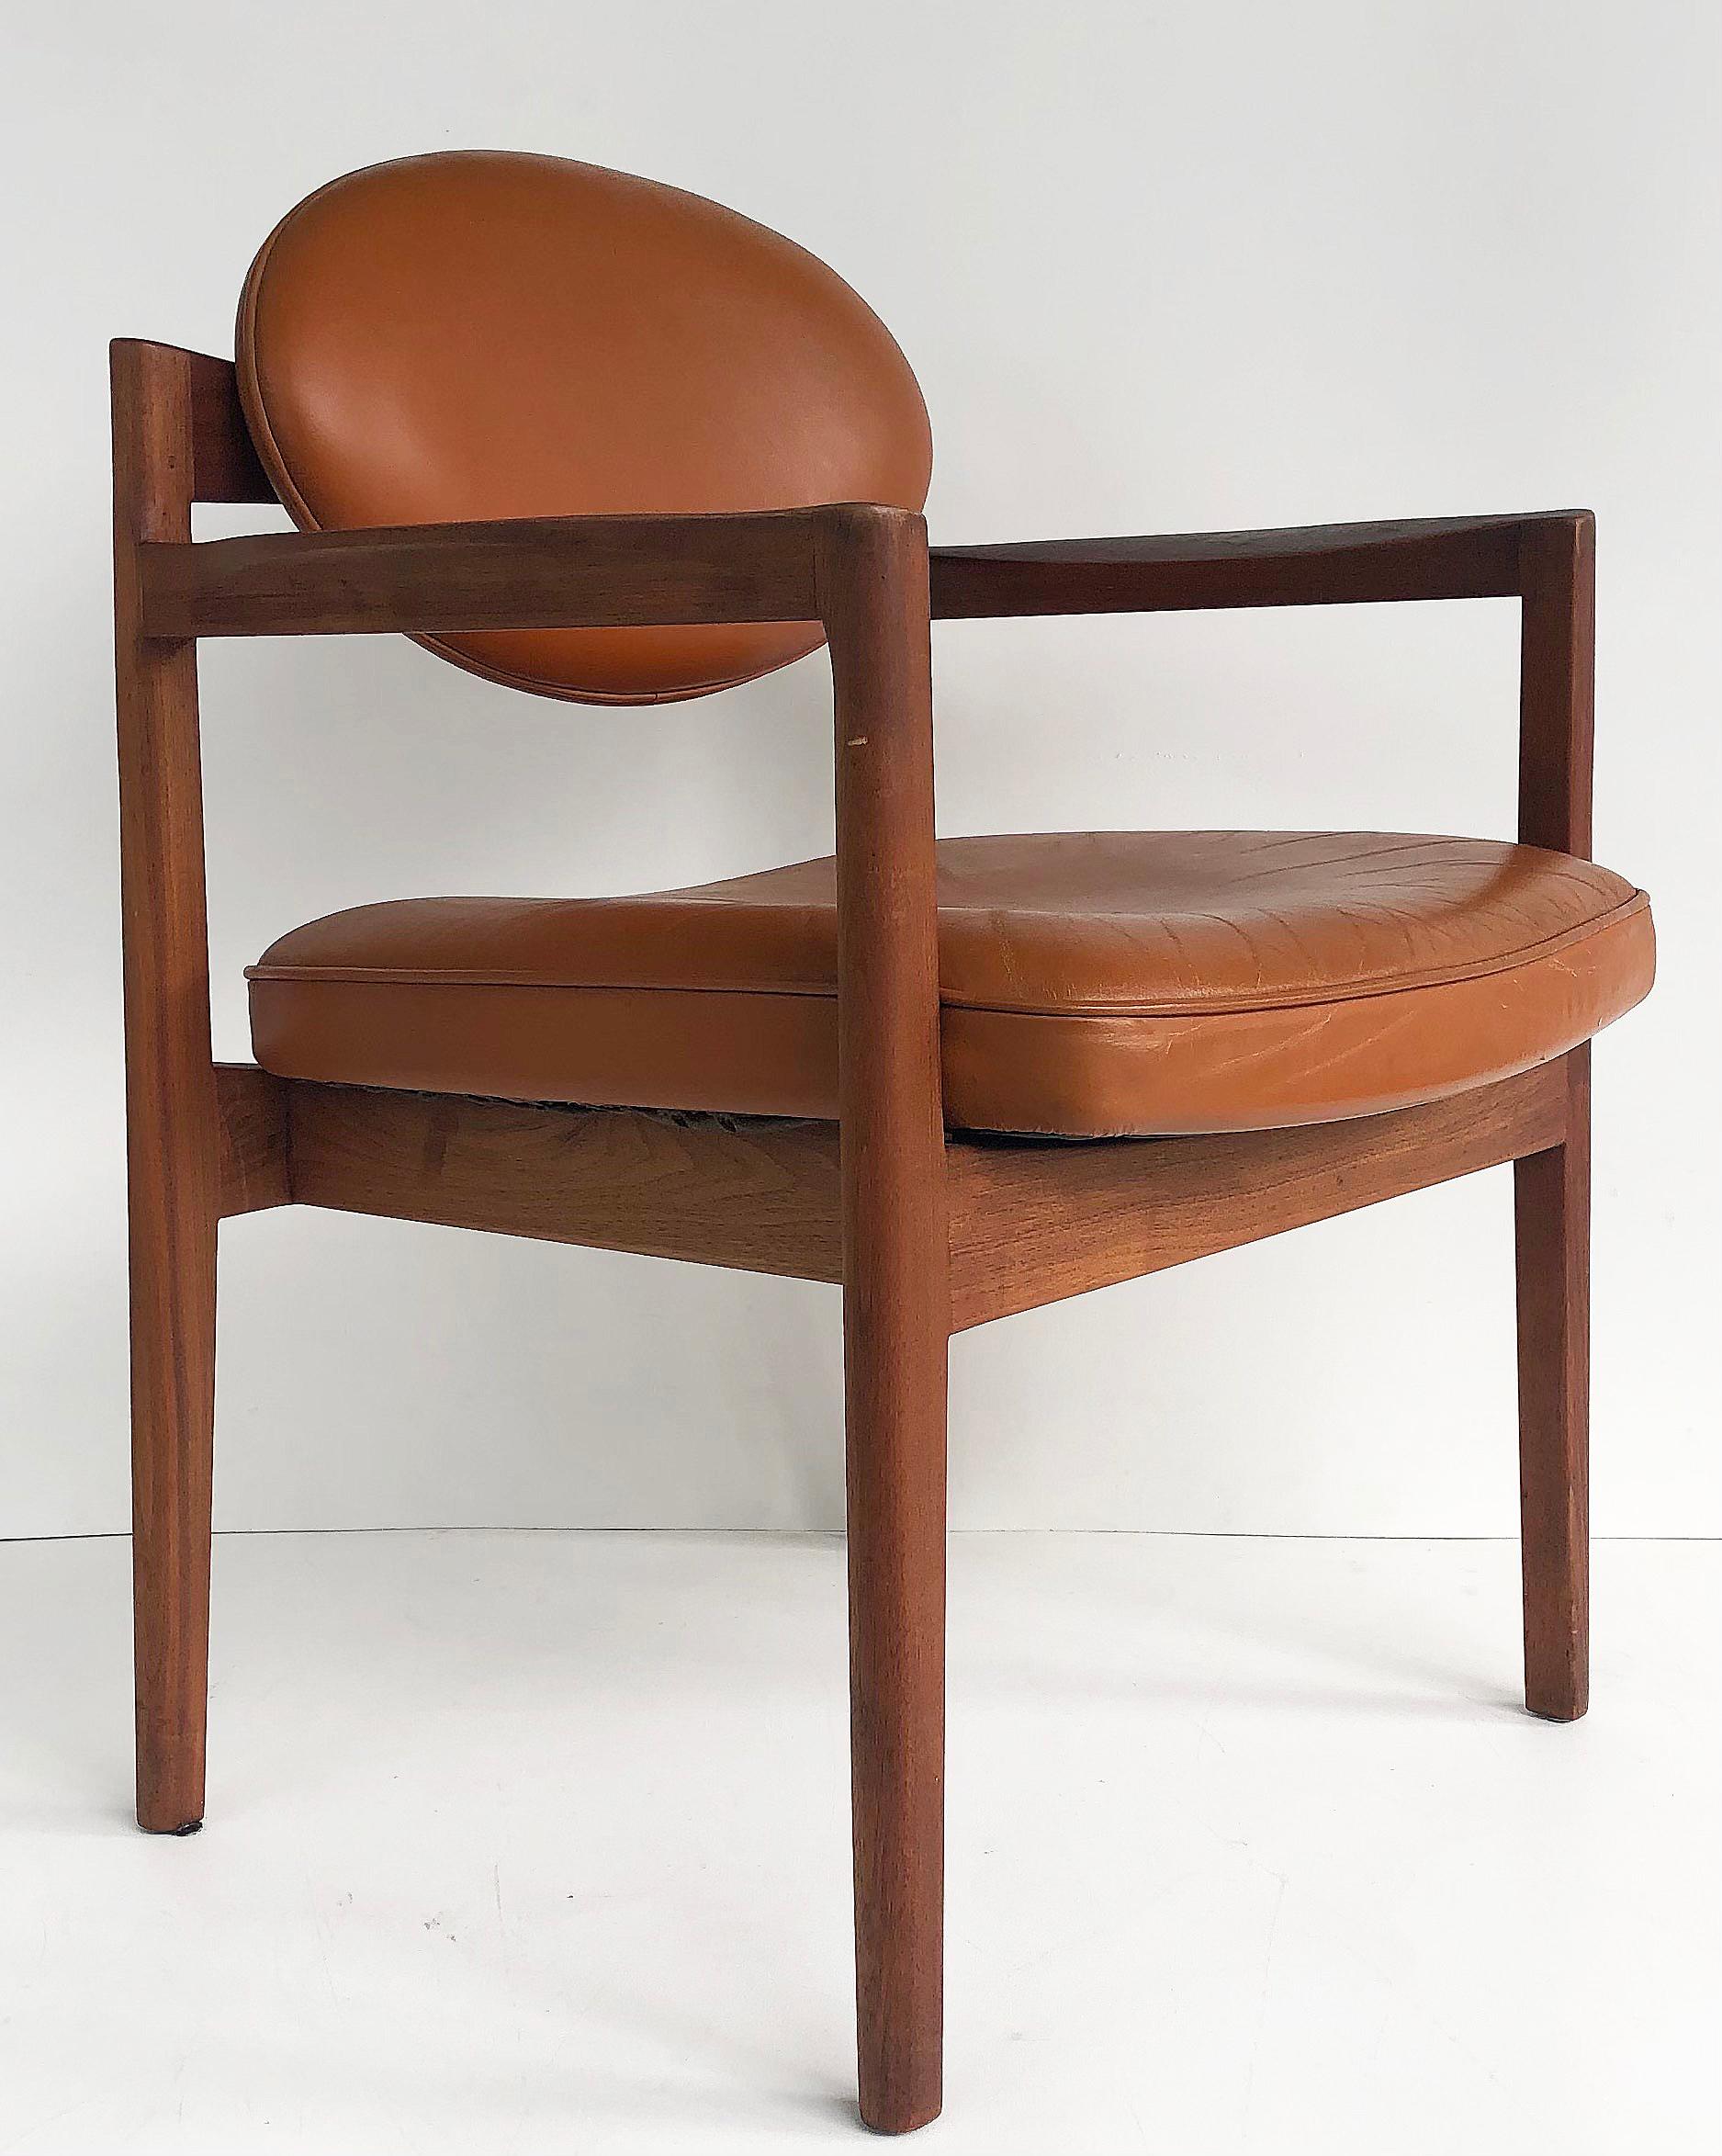 Offered for sale is an original pair of Jen Risom Design oiled walnut and leather upholstered armchairs. The chairs have upholstered oval backs on a sculptural walnut base, c.1965. A re-edition of the chair is currently being retailed at John